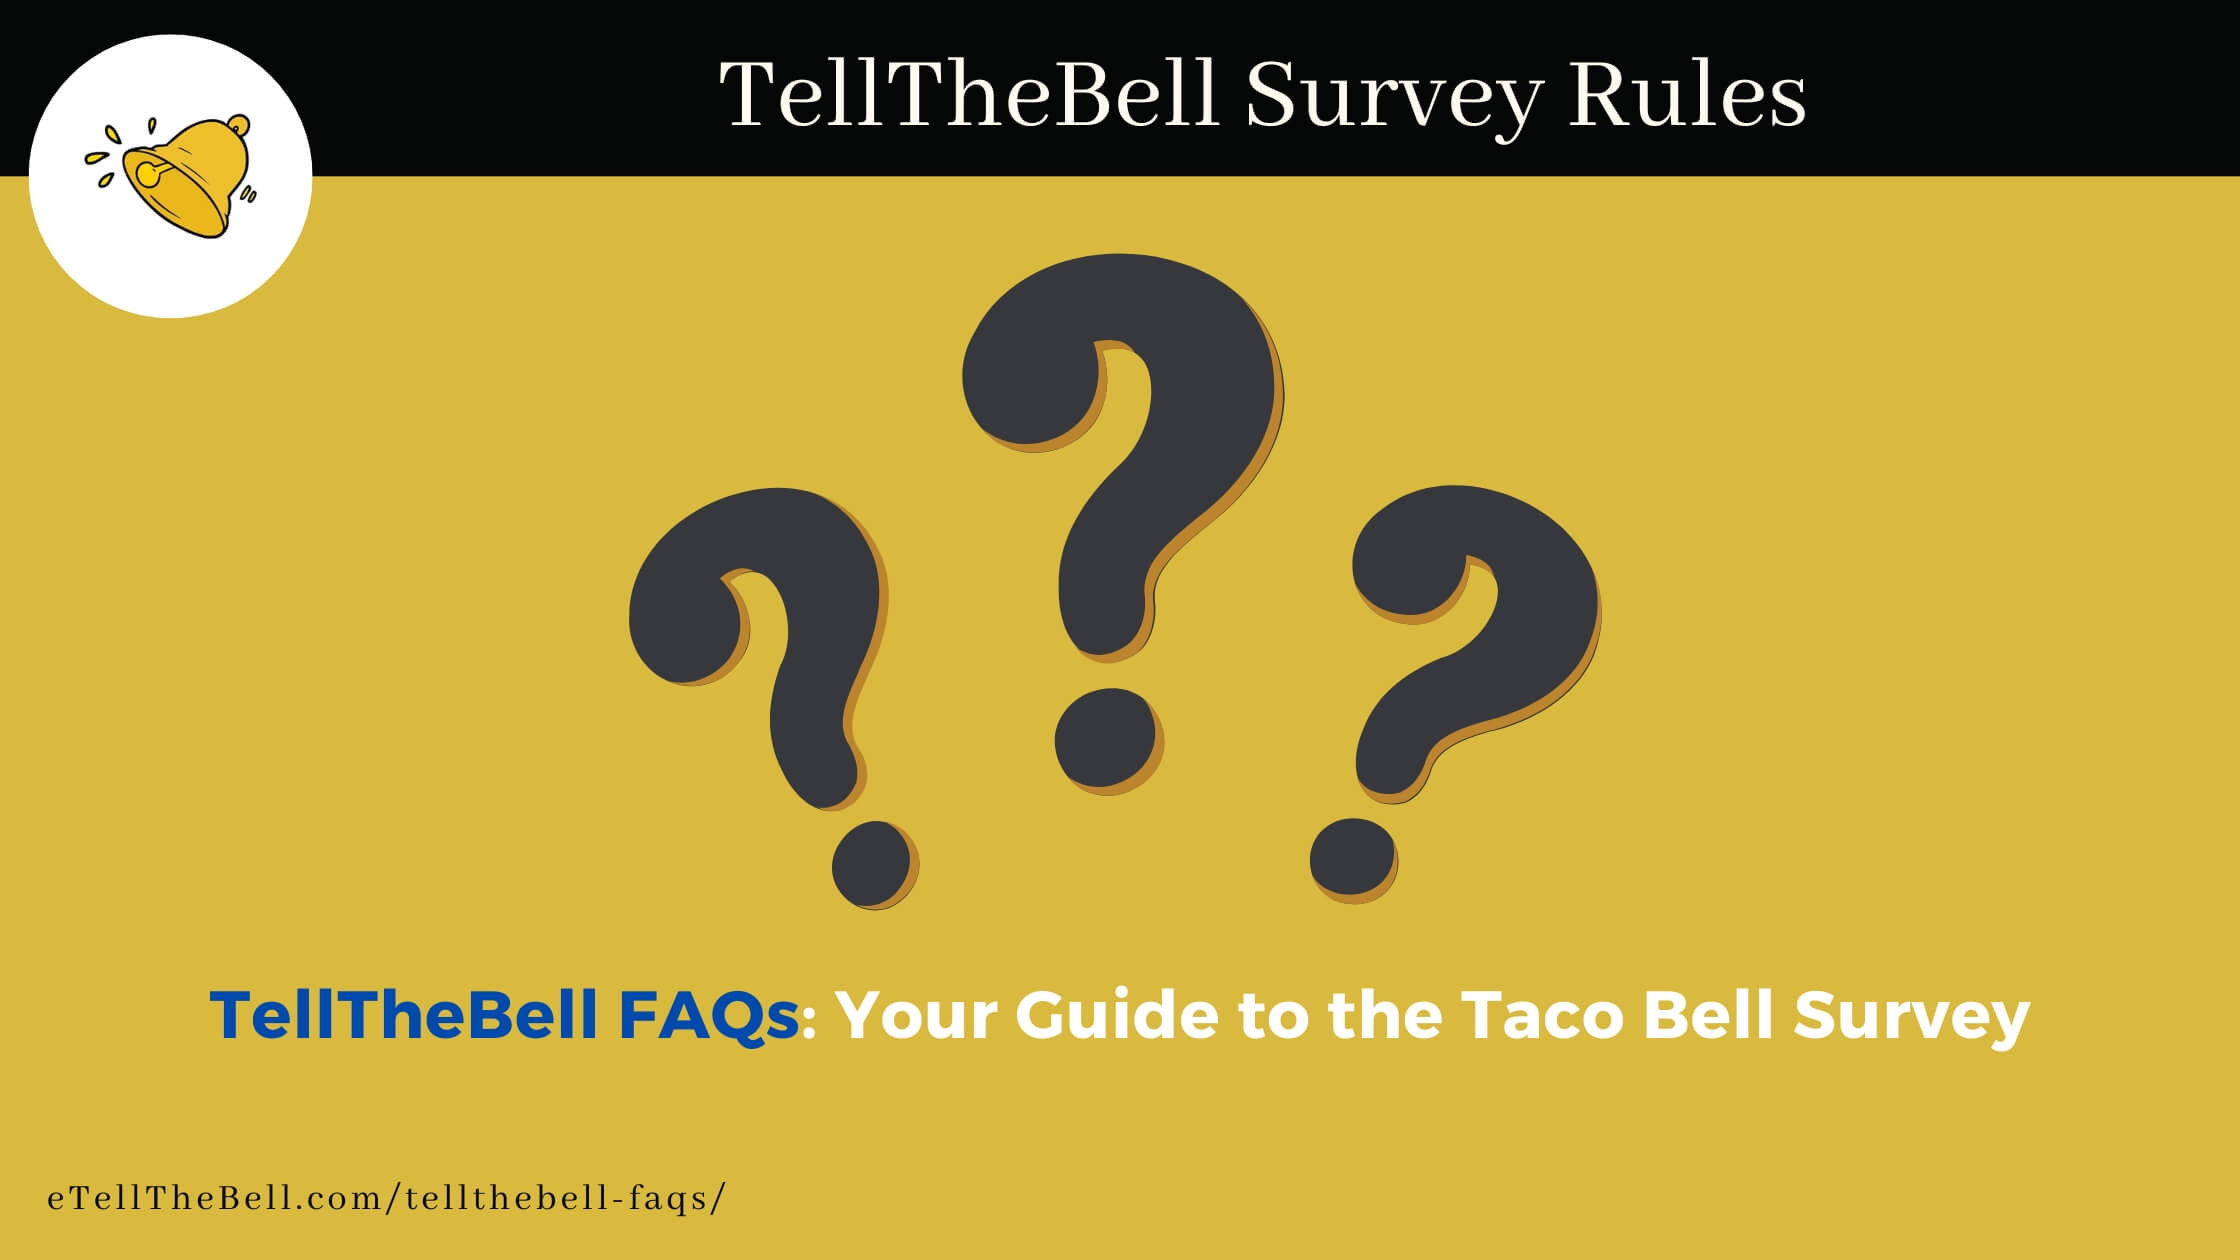 TellTheBell FAQs: Your Guide to the Taco Bell Survey